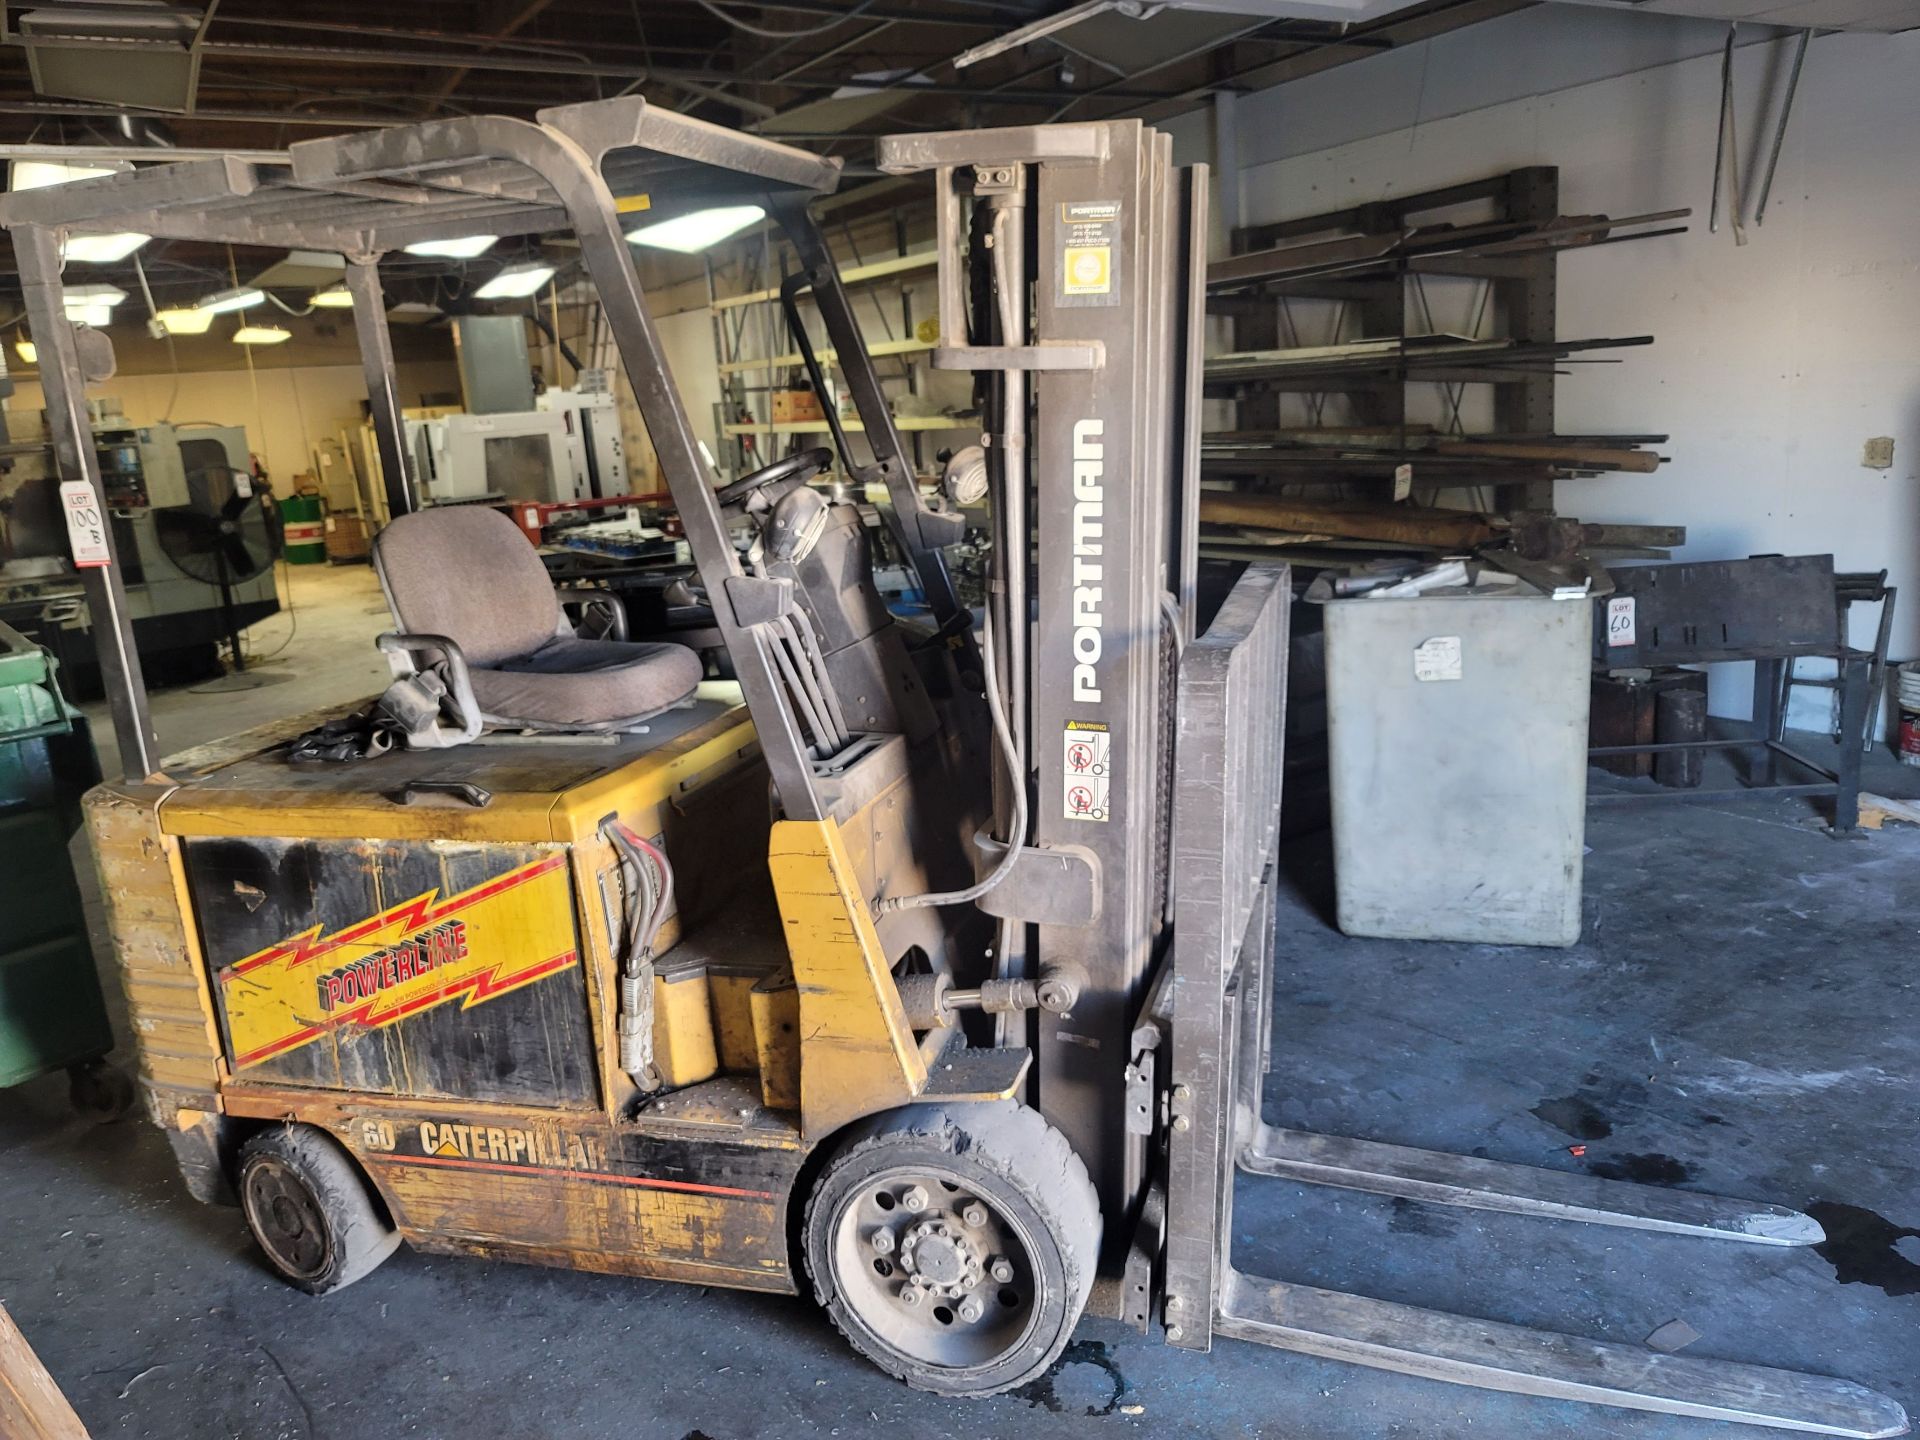 CATERPILLAR ELECTRIC FORKLIFT W/ CHARGER, MODEL 2EC30, 6,000 LB CAPACITY, 3-STAGE MAST, SIDE